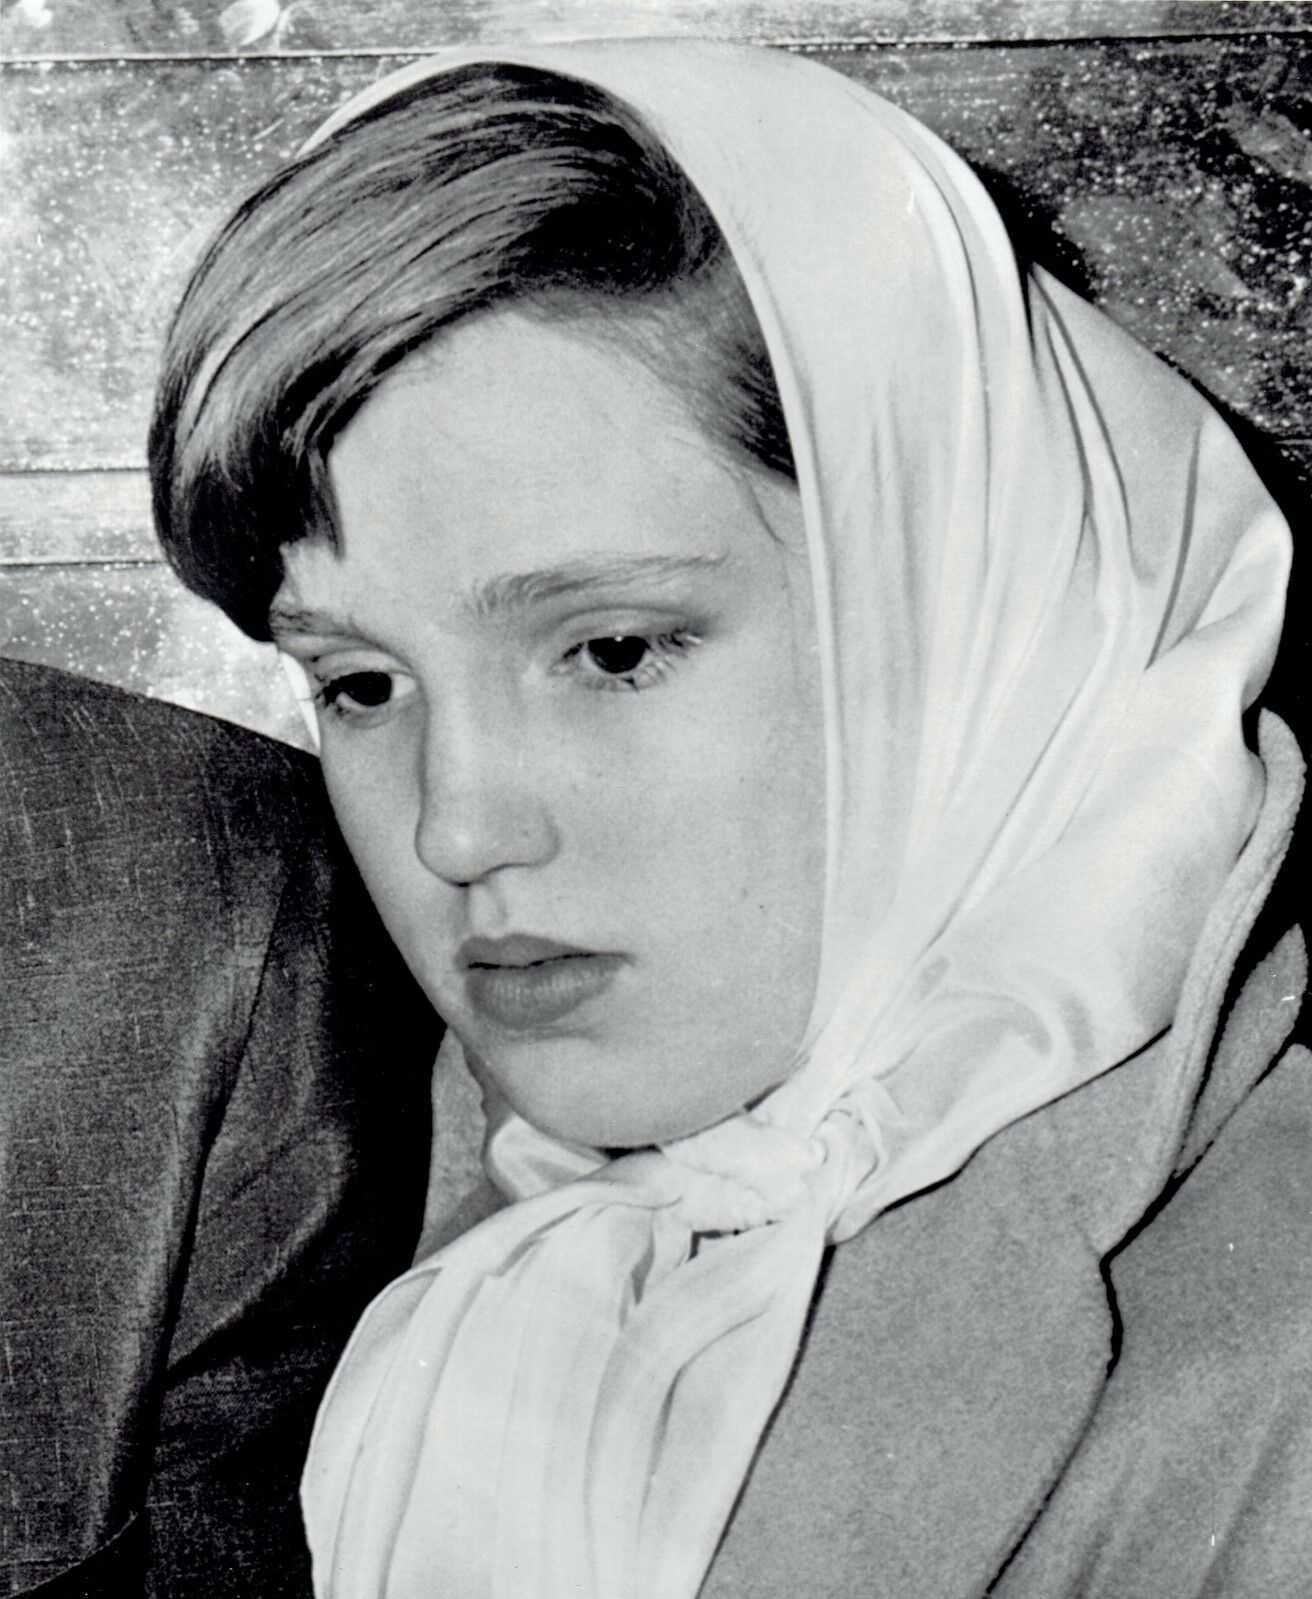 Picture of Cheryl Crane after arrest for murder of Johnny Stompanato on April 9, 1958  | Photo: Public Domain, Wikimedia Commons